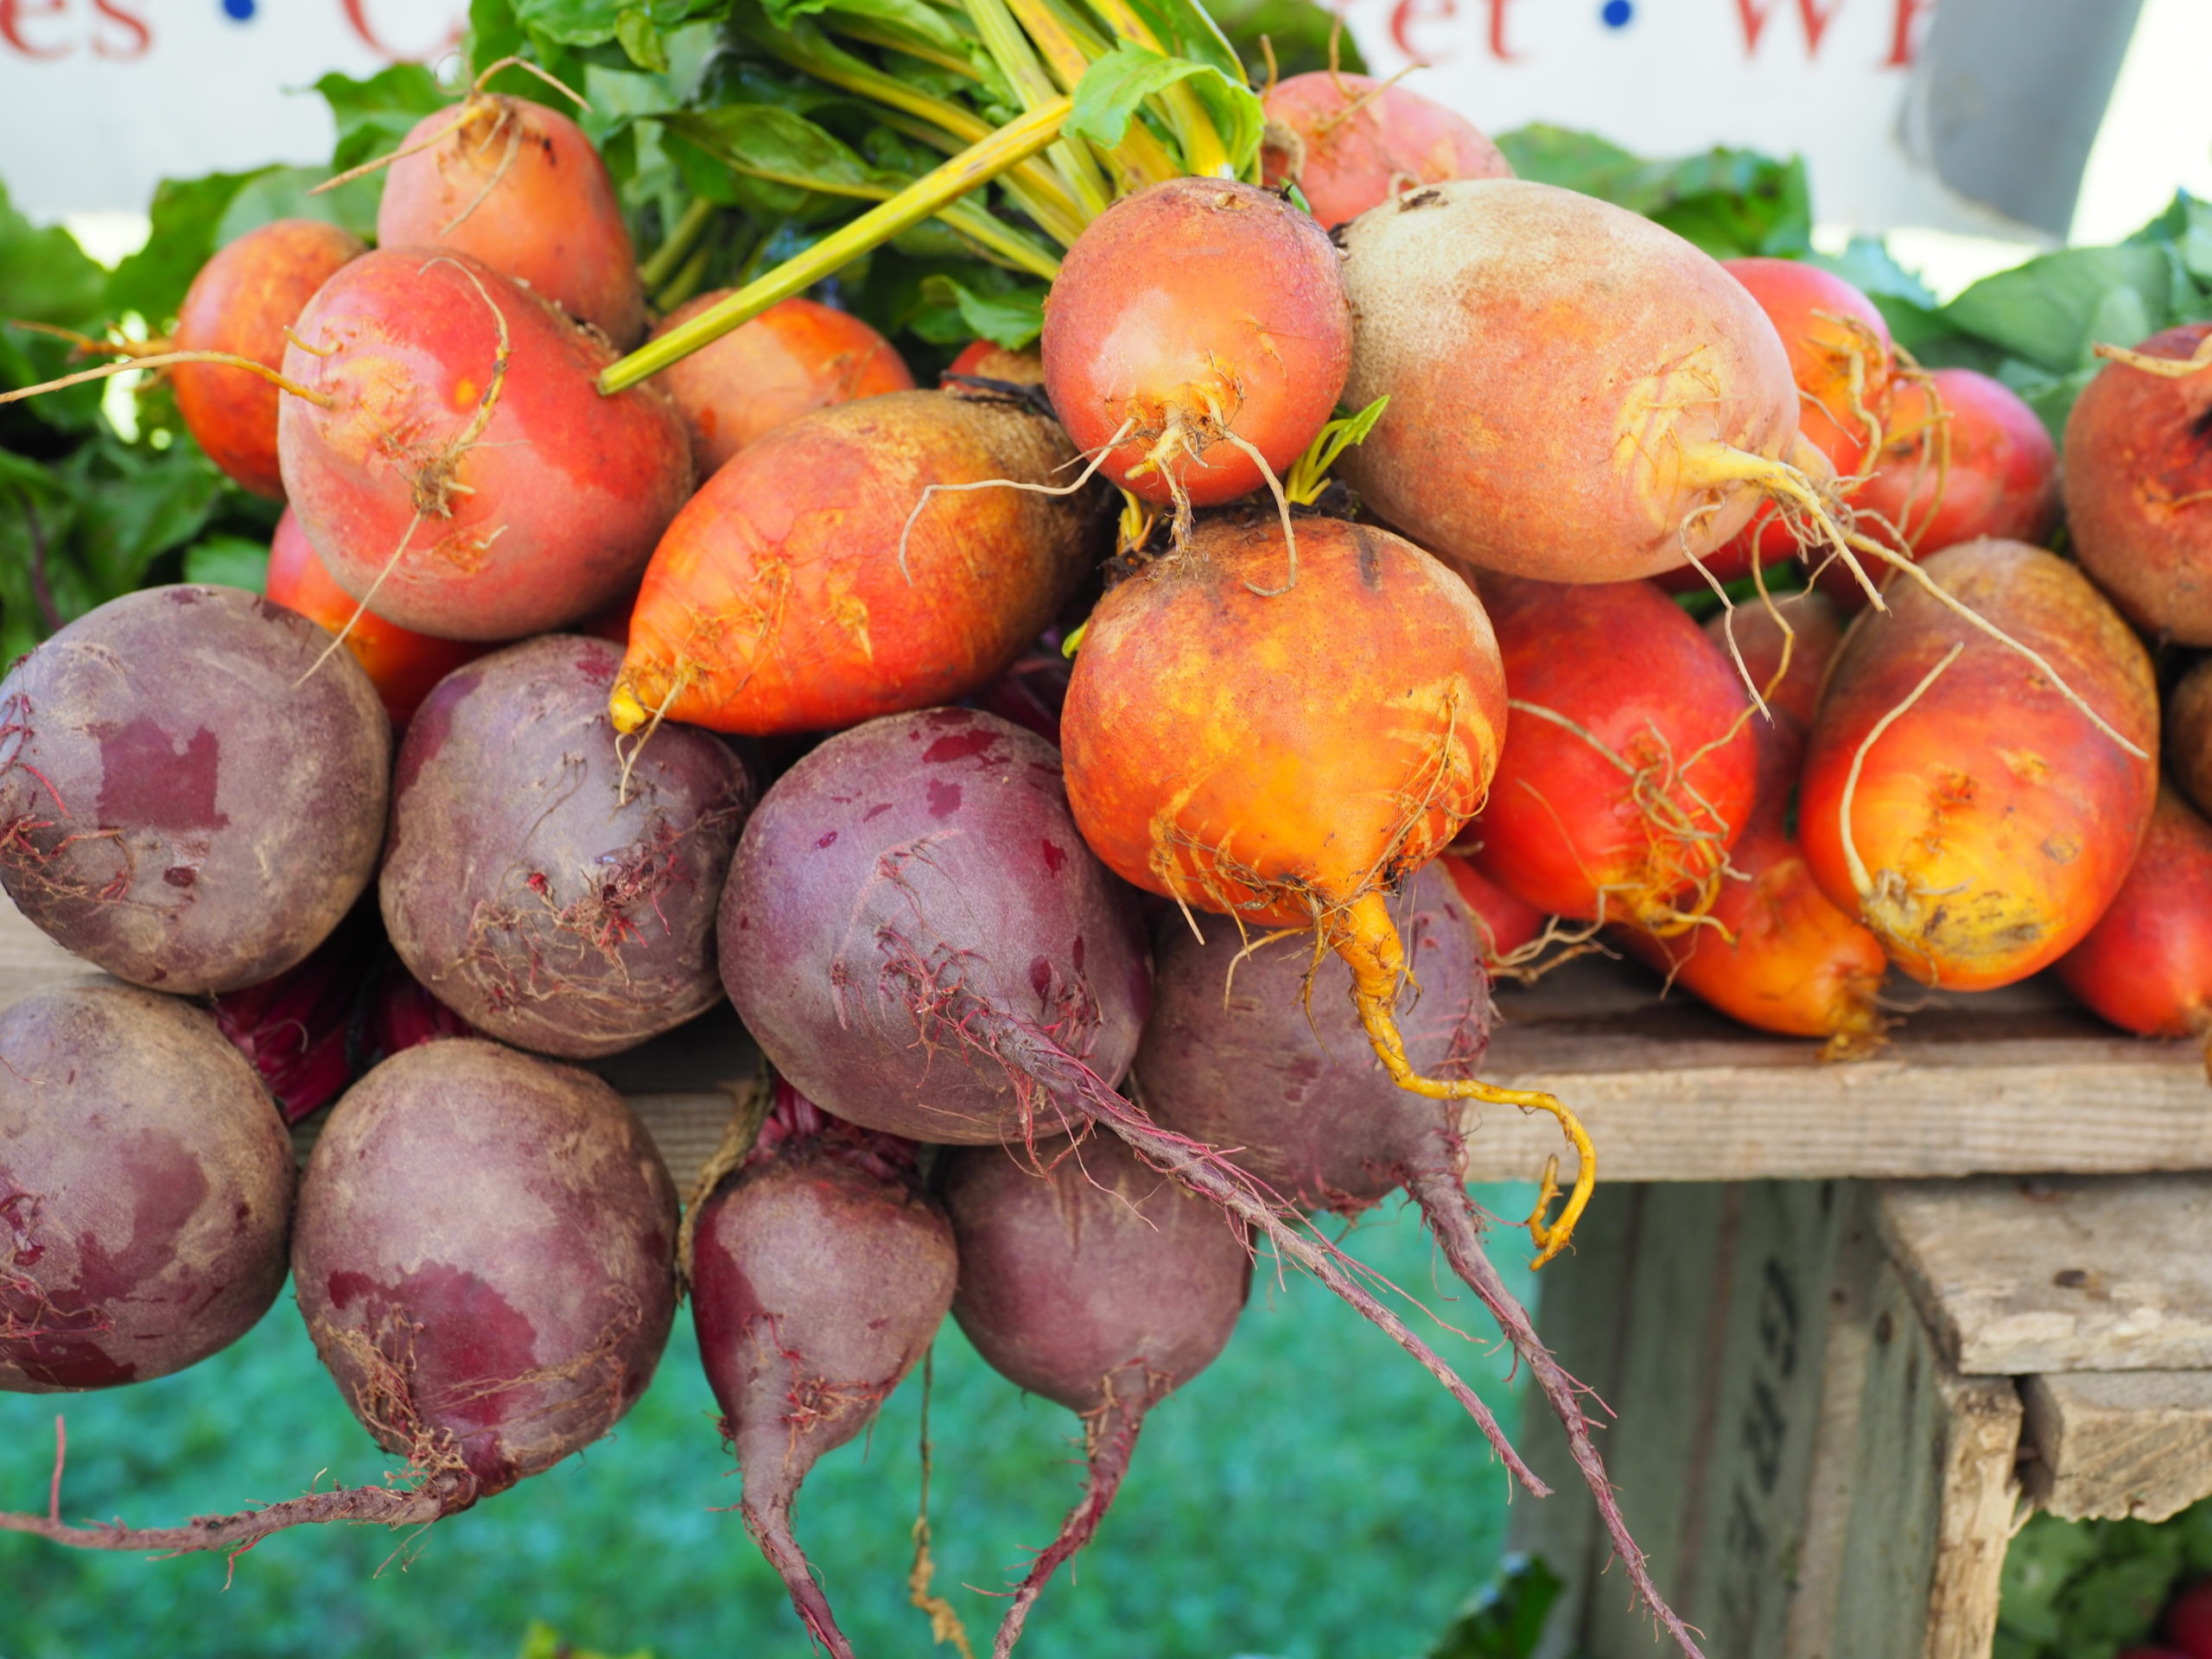 Remember that beets come in a range of colors. These beets were just harvested and washed then bunched for sale at a farmers market. Know the “days to maturity” and check the soil for “peeking shoulders’.” If nonstorage varieties are left in the ground too long they get pithy and loose flavor quickly.